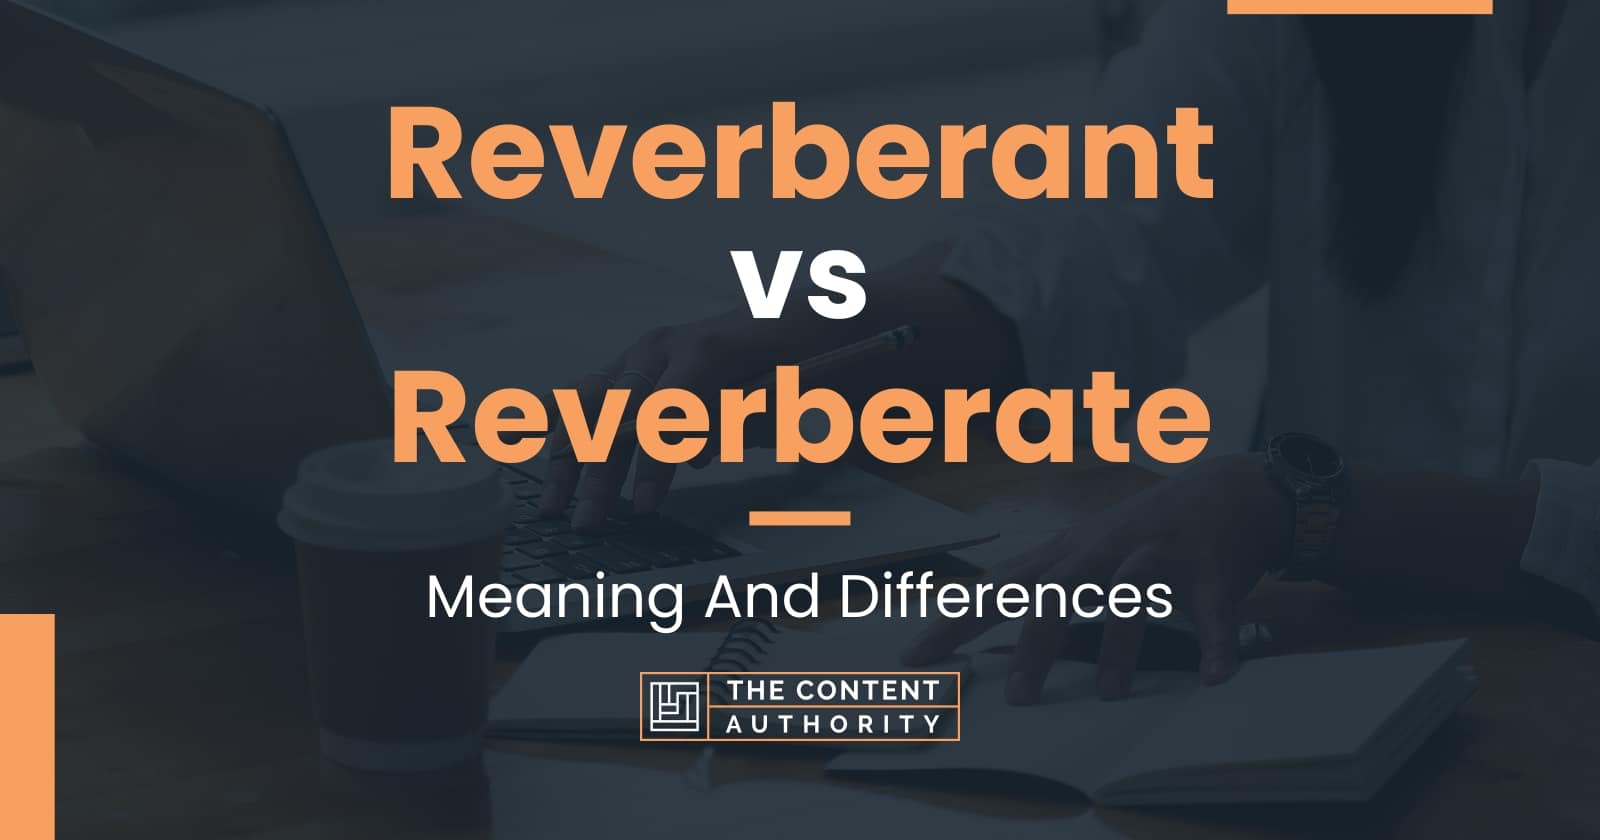 Reverberant vs Reverberate: Meaning And Differences